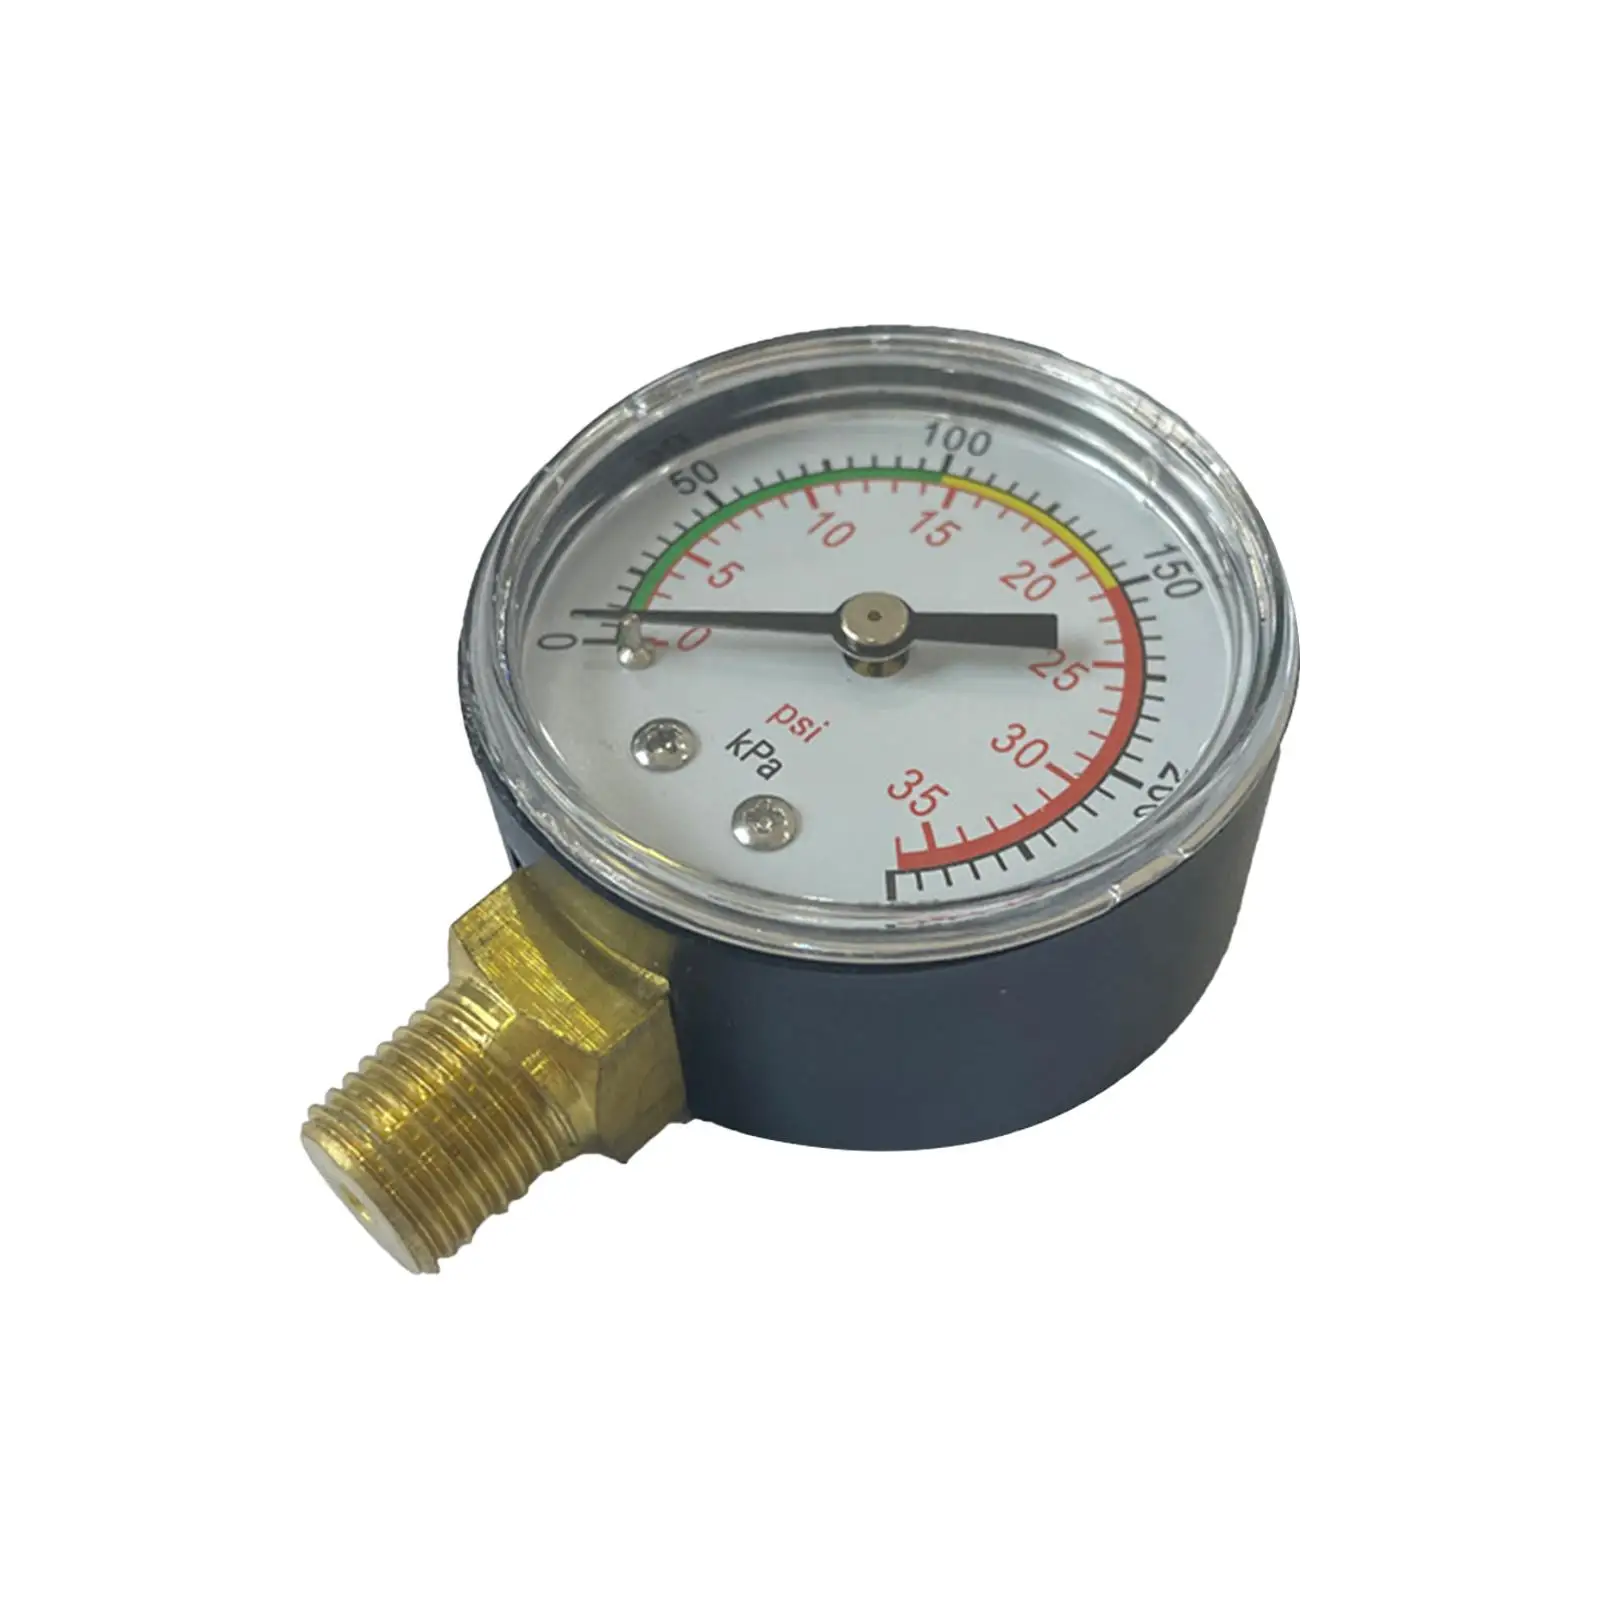 

Pressure Gauge for Swimming Pool Accuracy Lightweight Dual Scale Dial Display Pool Sand Filter Pressure Gauge for Hot Tubs Accs